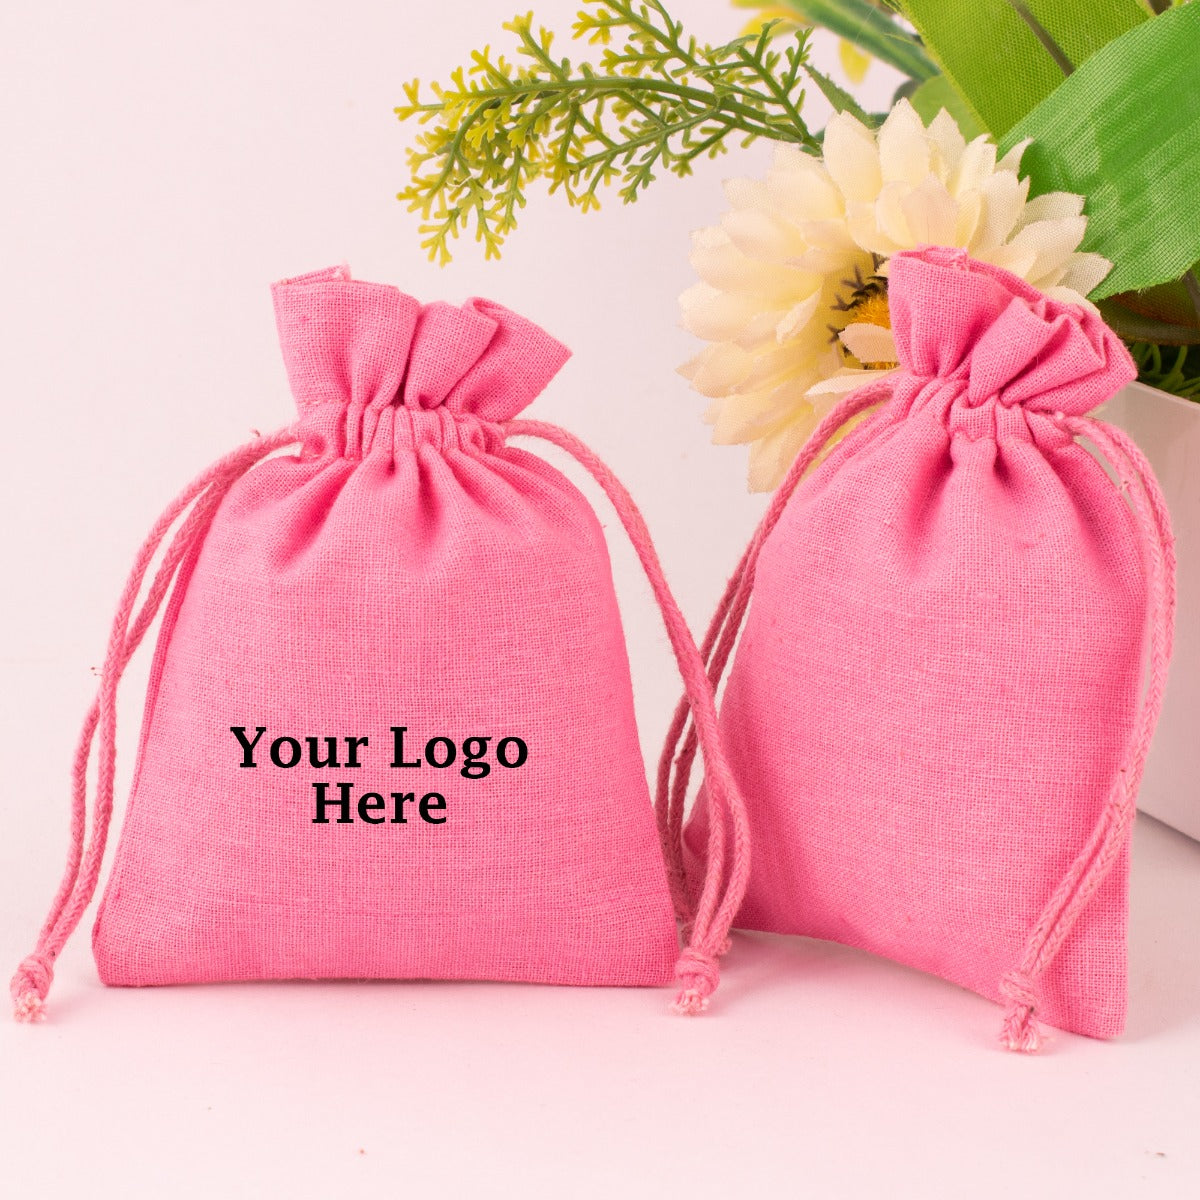 Personalized logo print Wedding Favor bags Gift Bag Jewelry Party Bags Drawstring Pouch soap package pouches